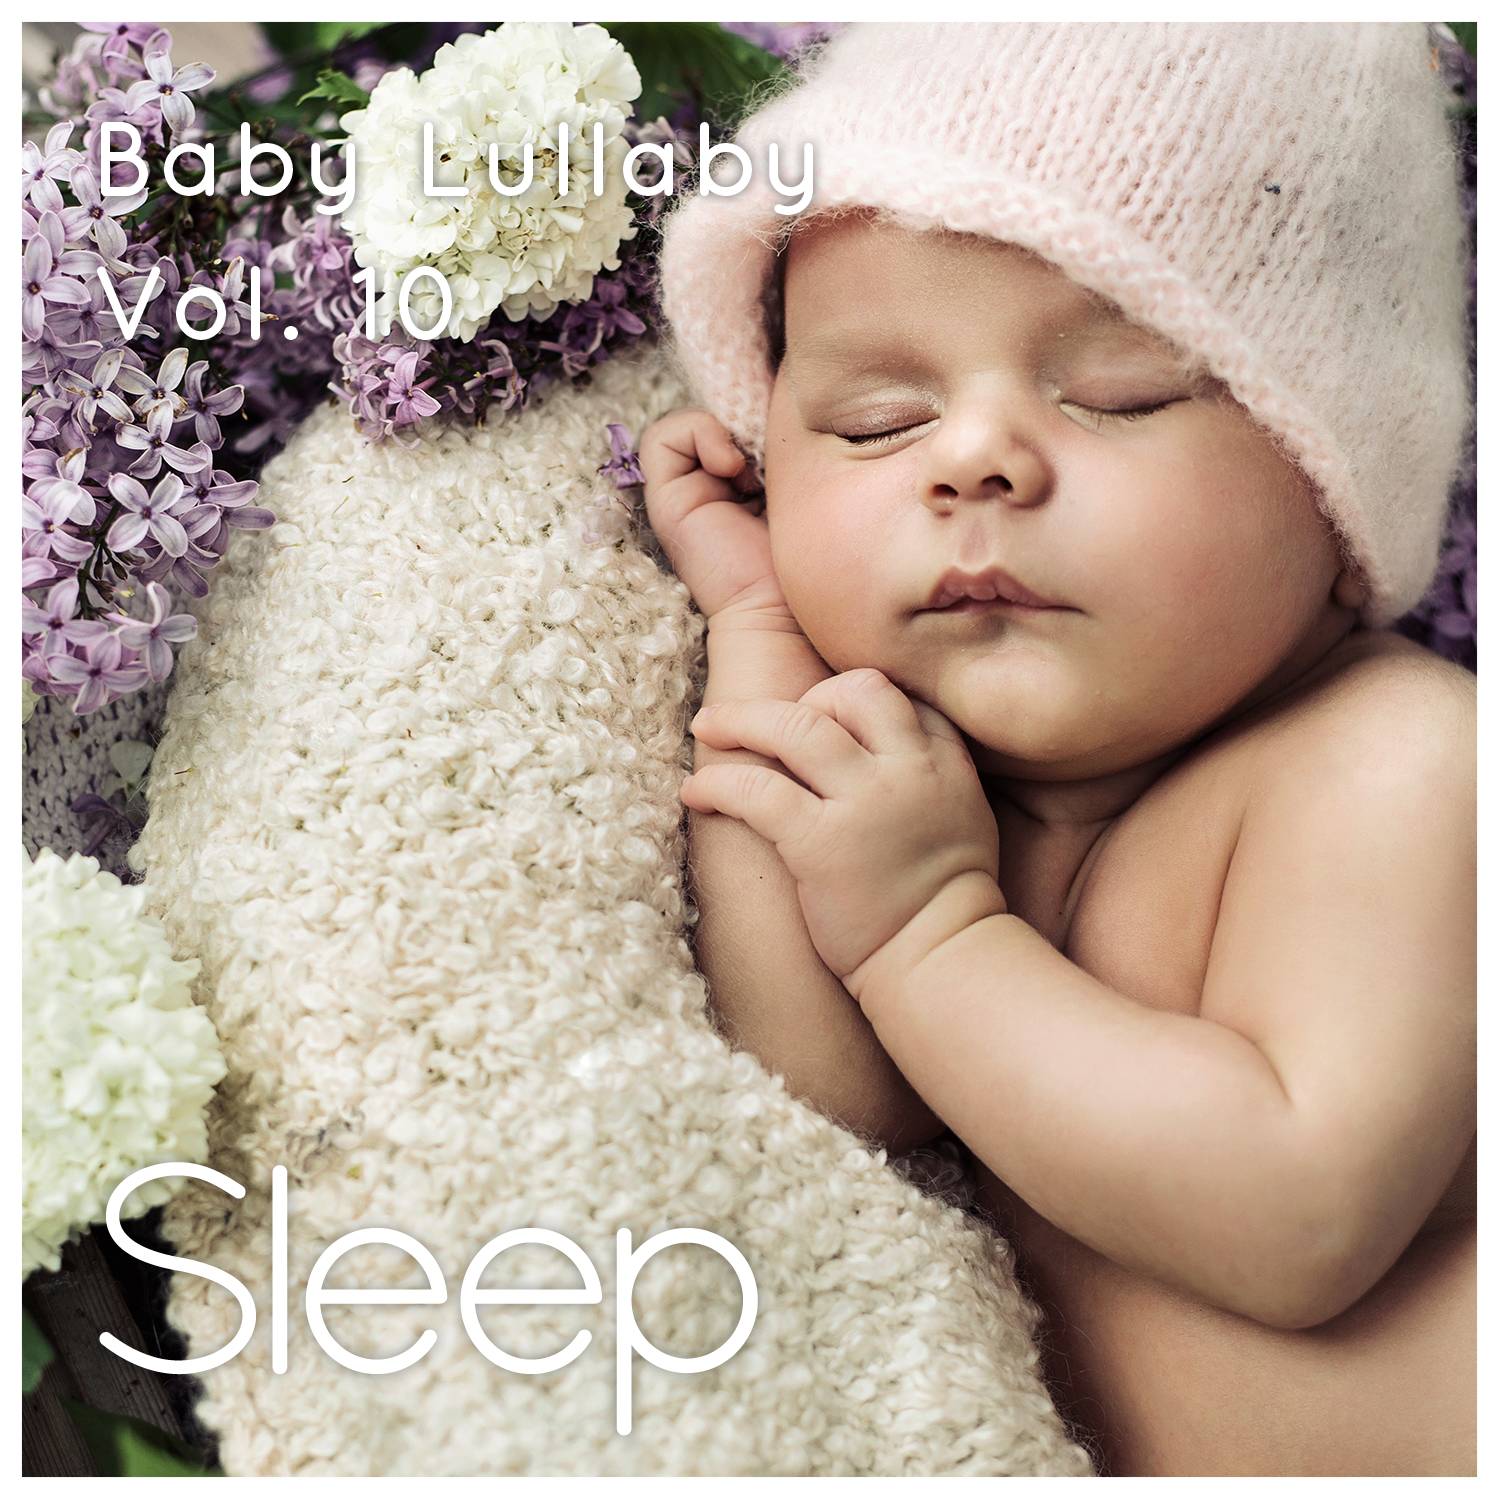 Baby Sleep Ambient Lullaby, Pt. 48